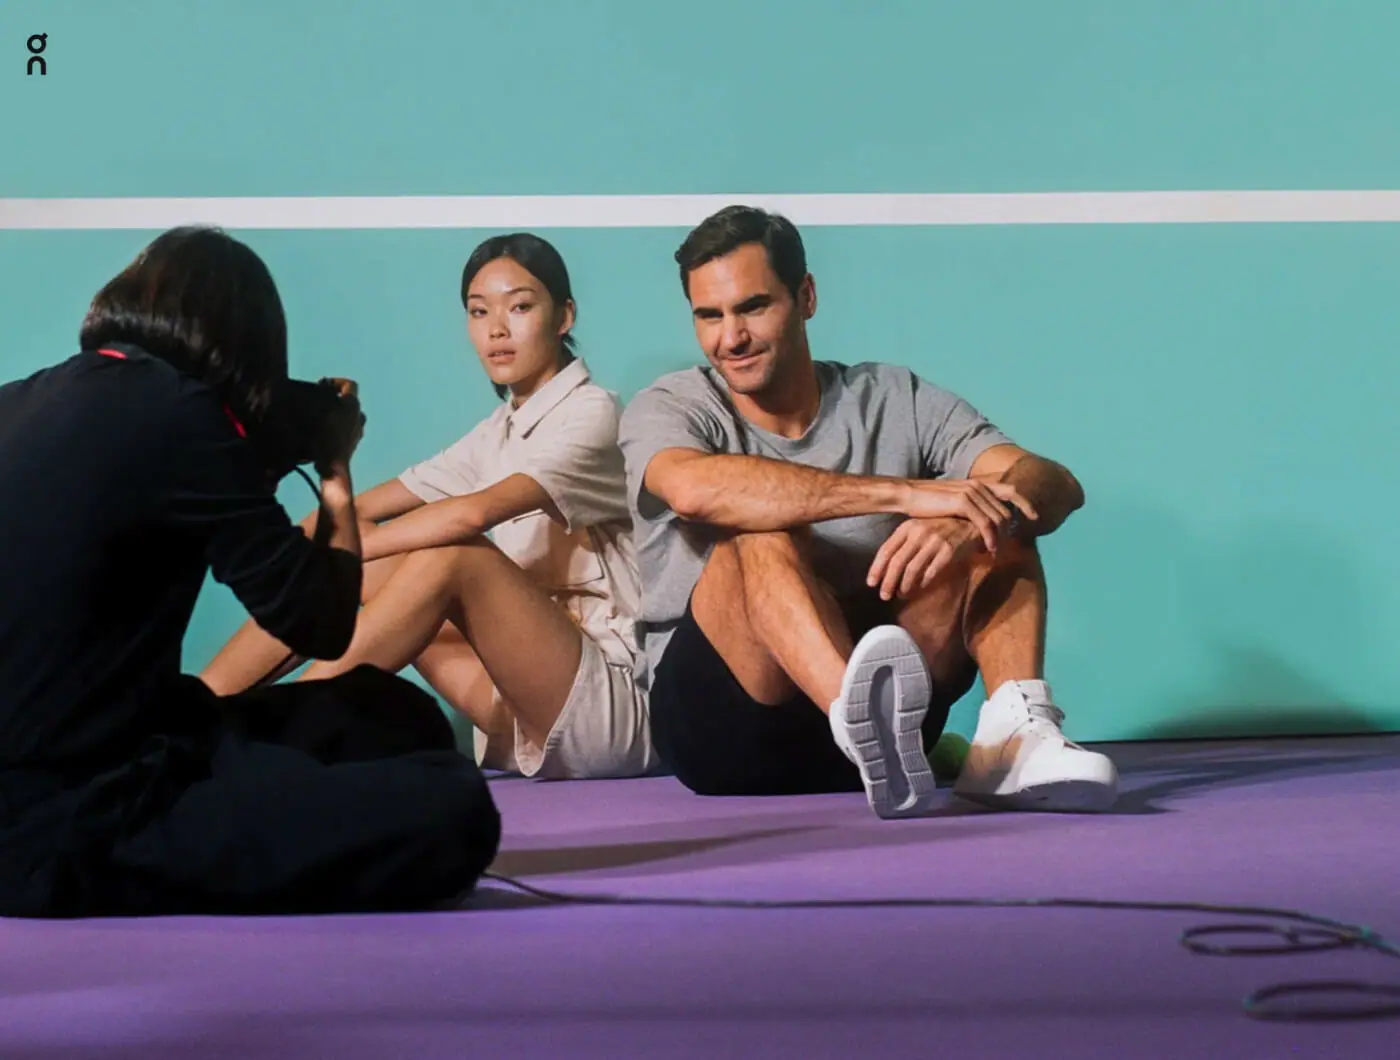 From Nike to On: How Roger Federer’s Shoe Collection Reveals His Passion for Fashion